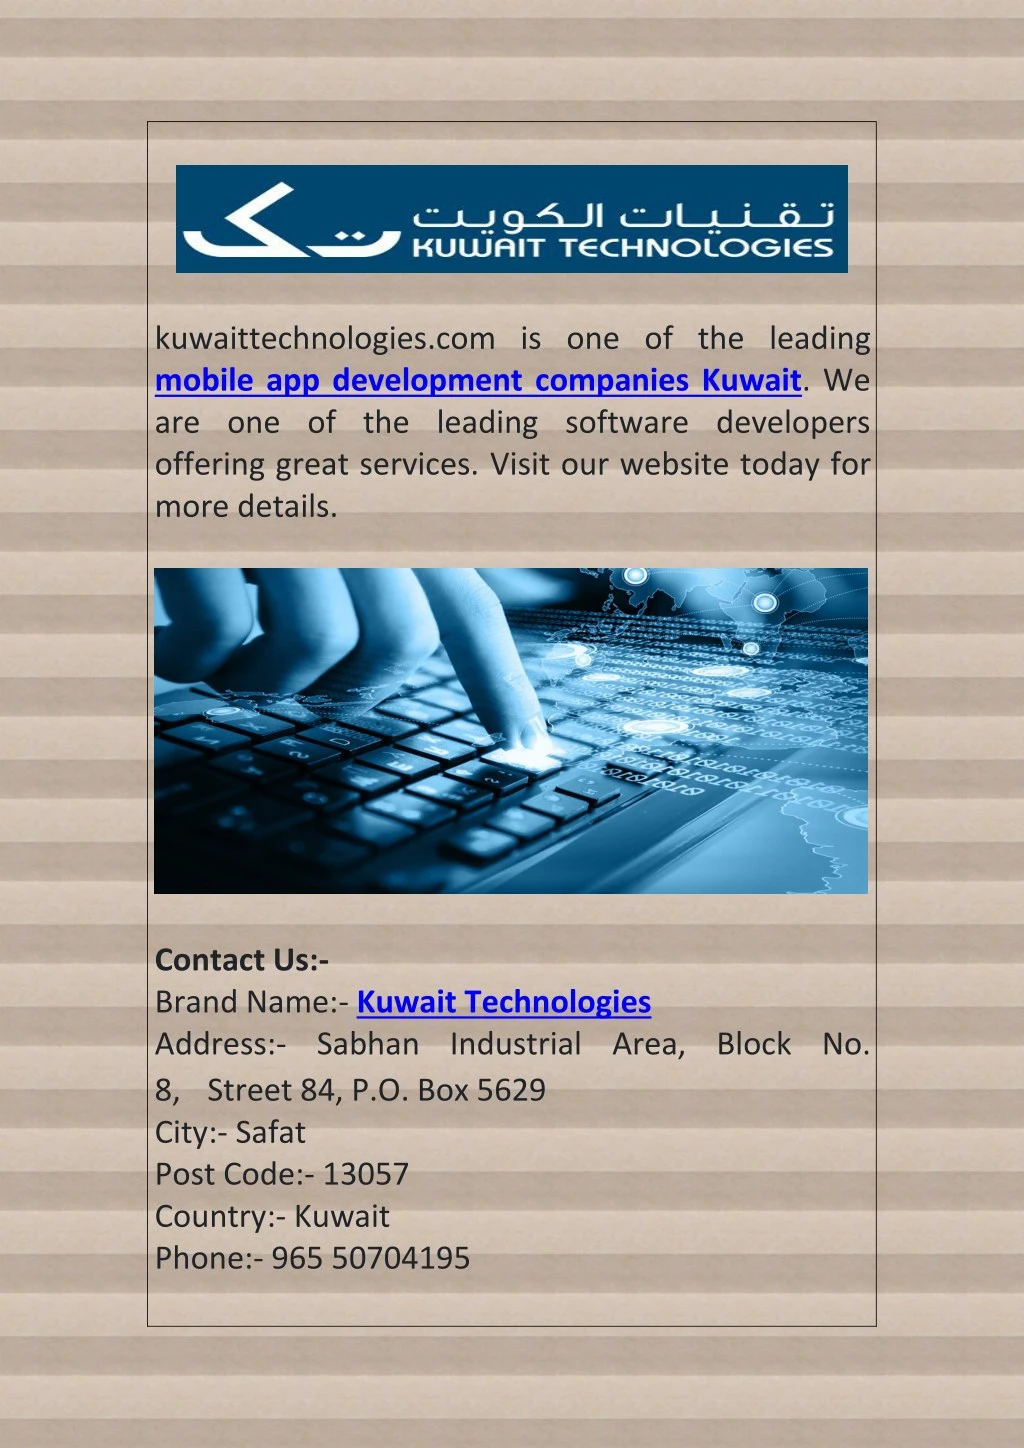 kuwaittechnologies com is one of the leading